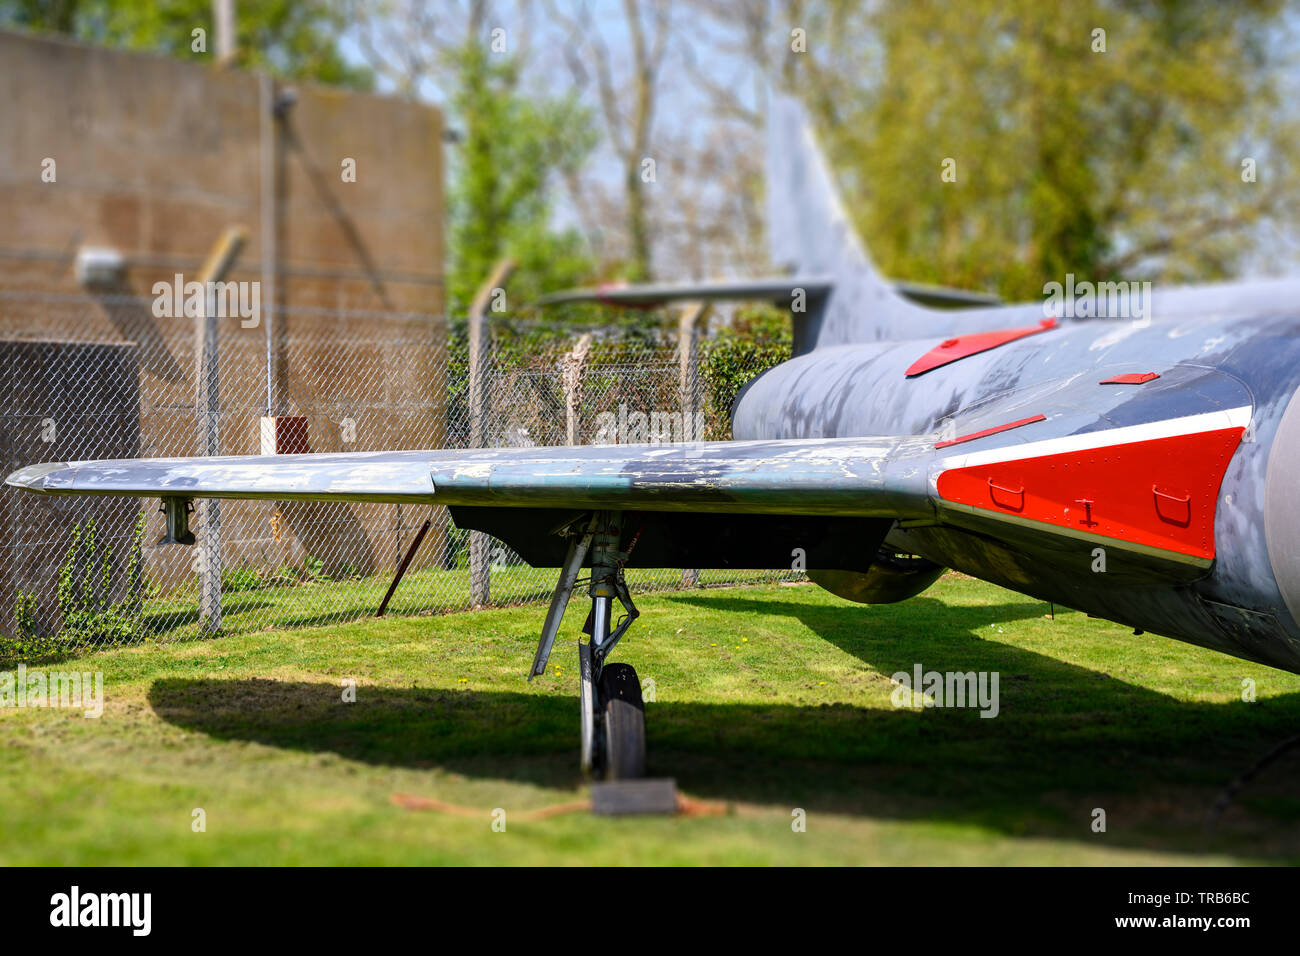 Hawker Hunter Cold War fighter jet Stock Photo